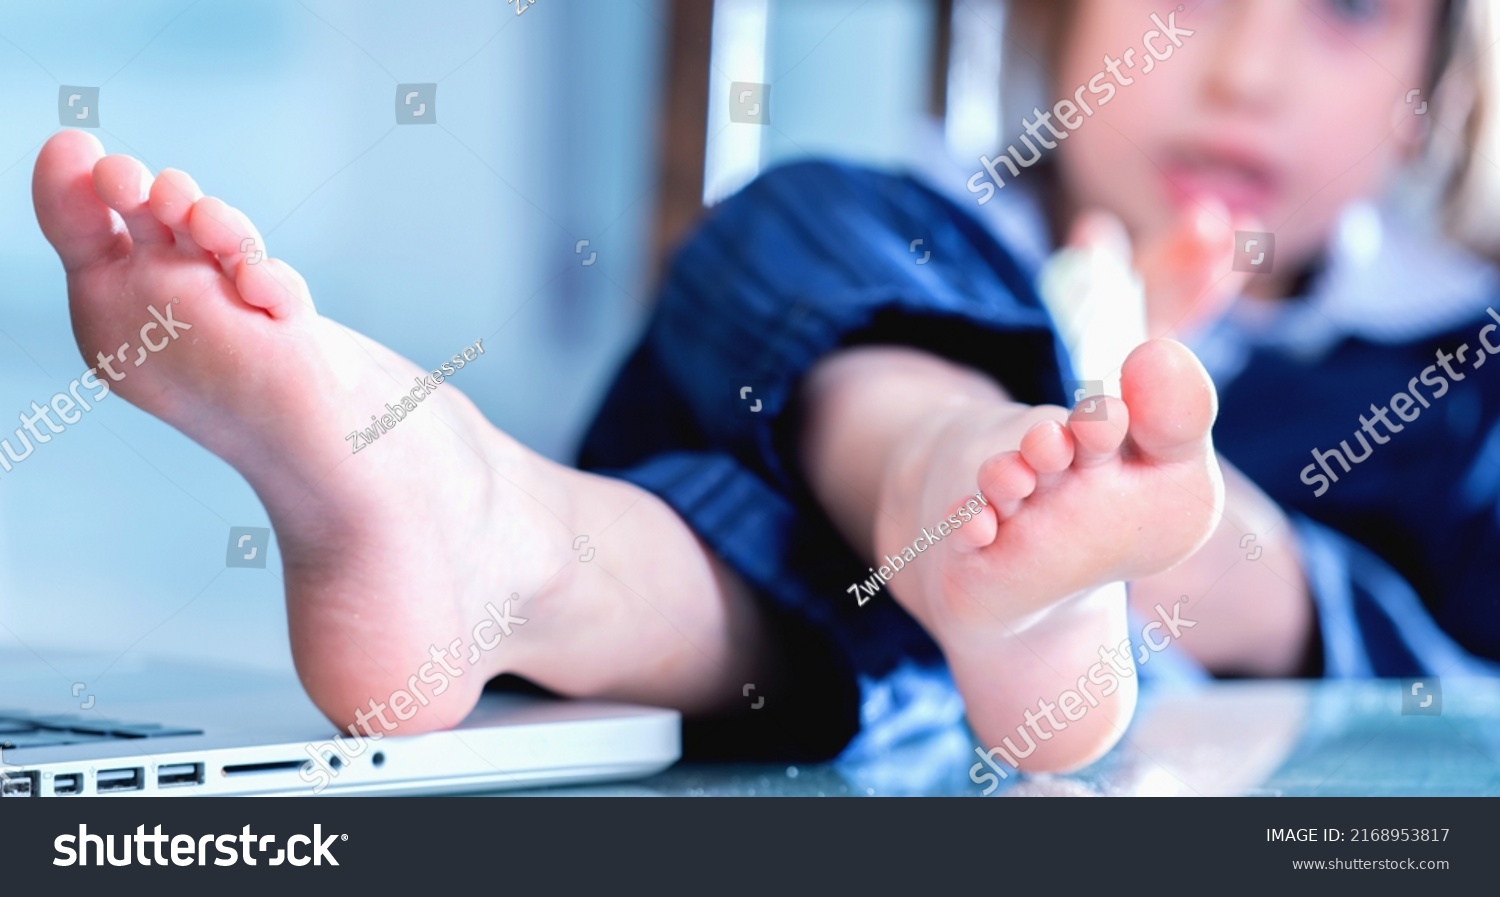 Young business girl with bare foots on the table in the office. Selective focus on foot. Horizontal image. #2168953817